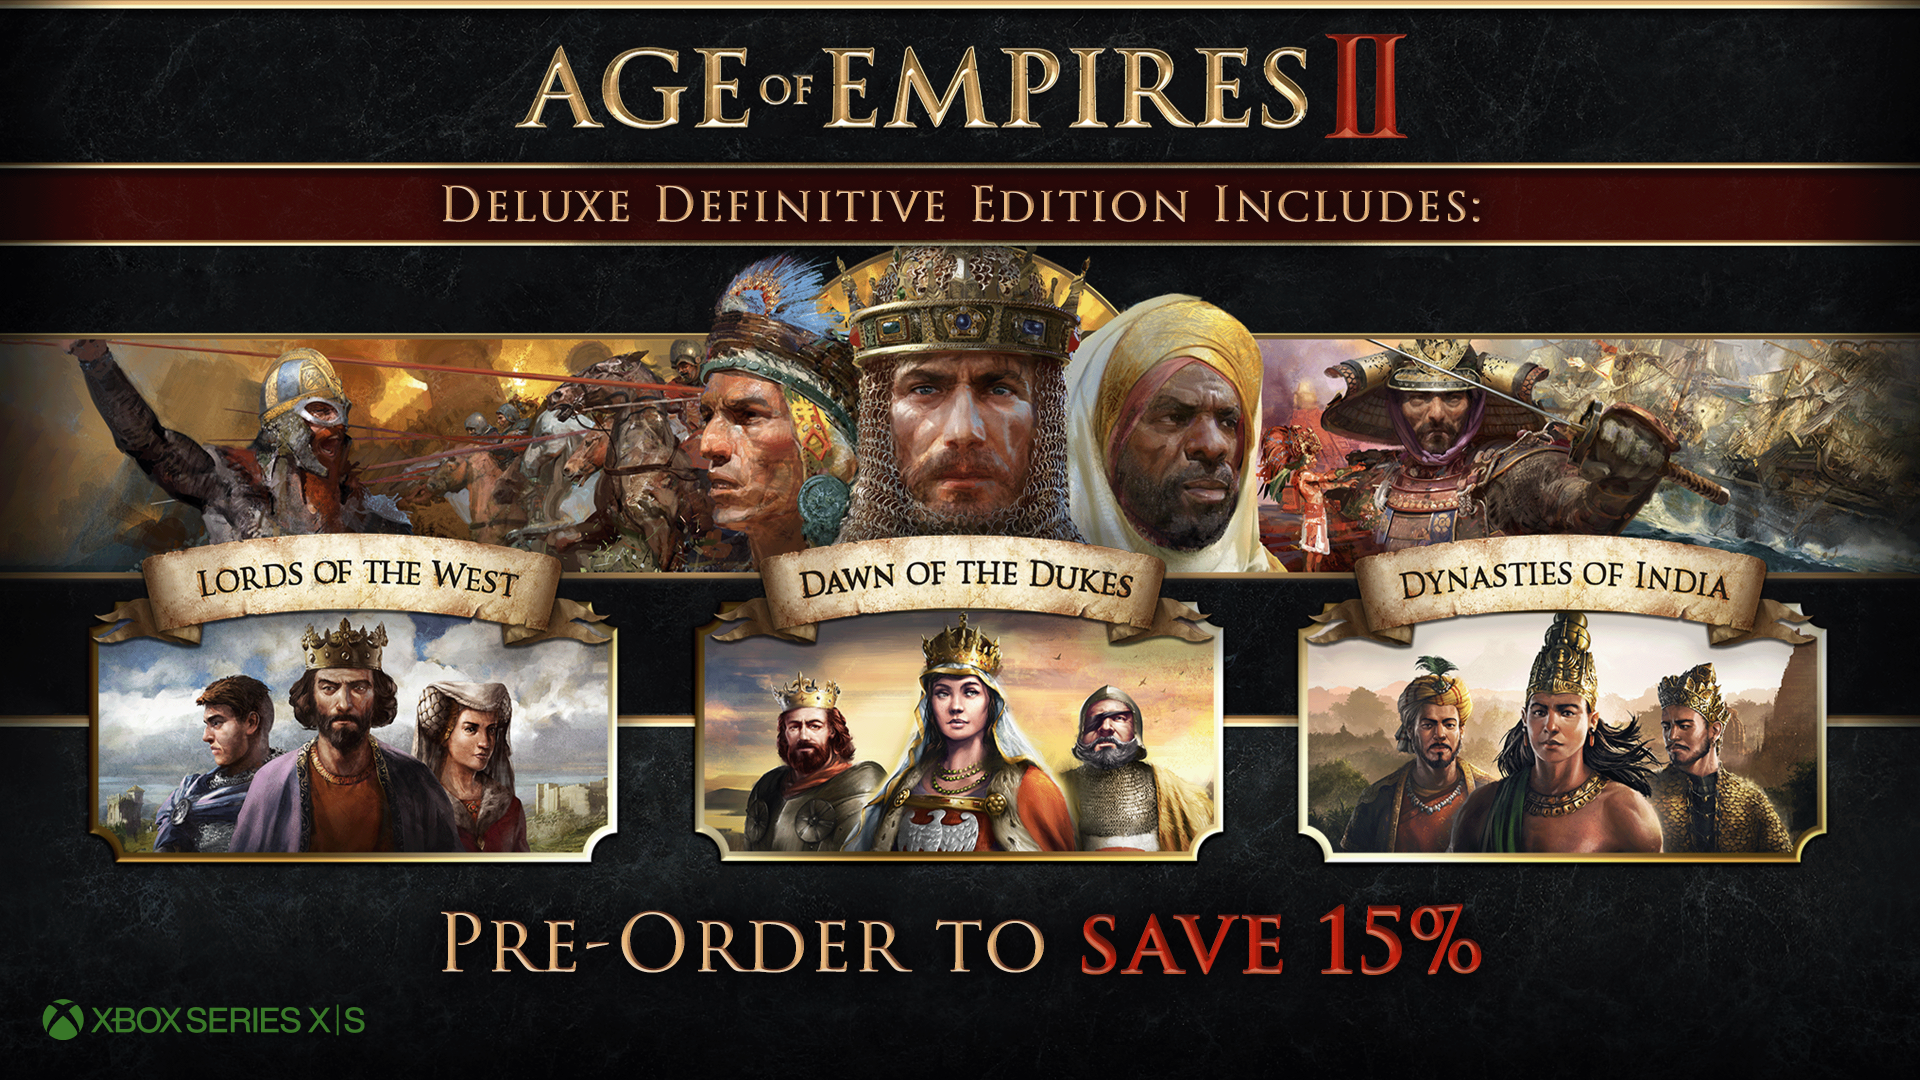 It’s finally here – Age of Empires II: Definitive Edition is landing on Xbox consoles January 31st! Want to make sure you can play on cons